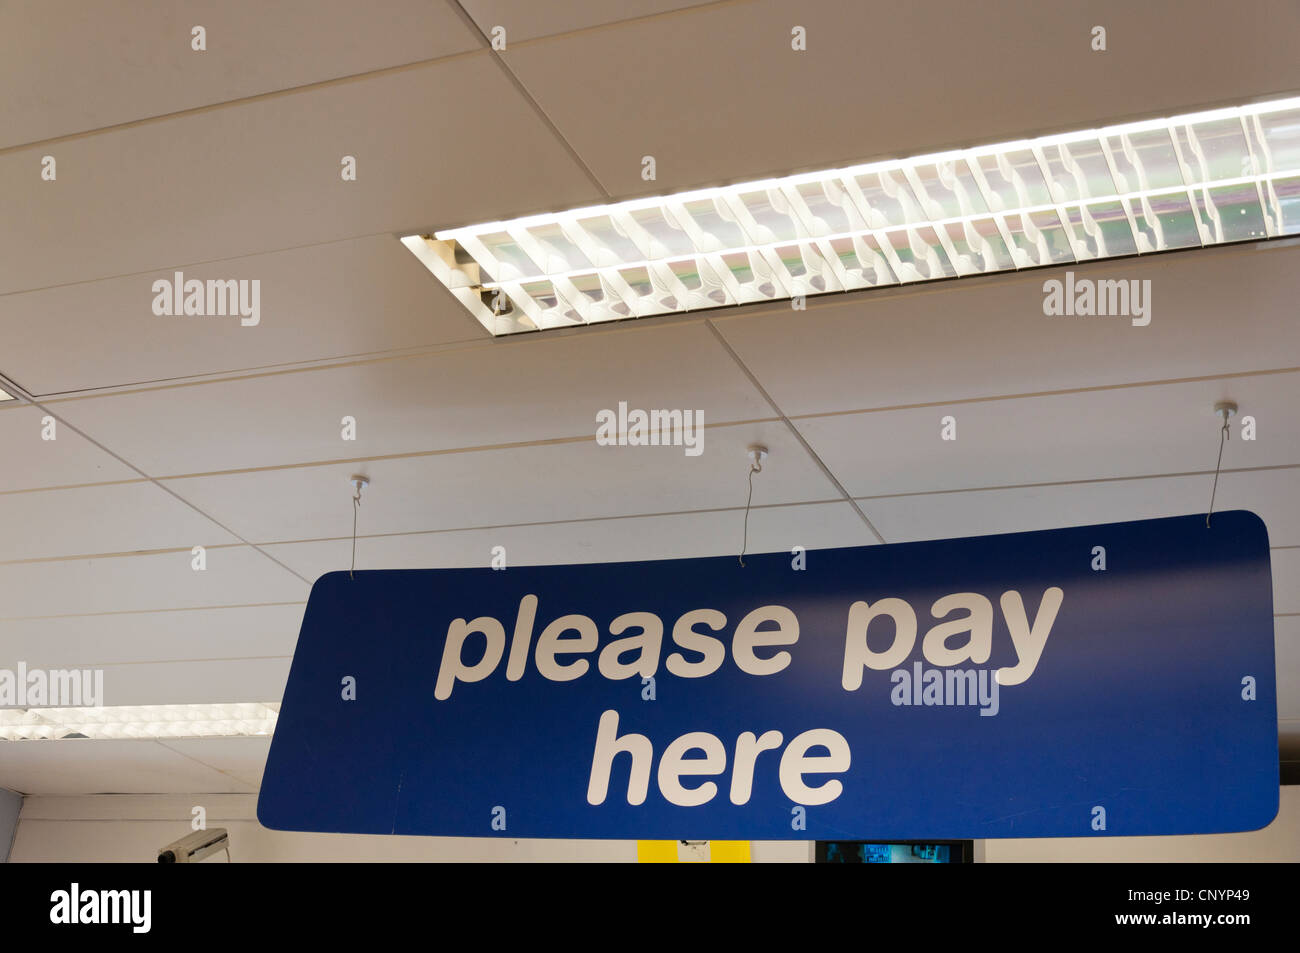 Please pay here sign hanging from the ceiling of a shop. Stock Photo